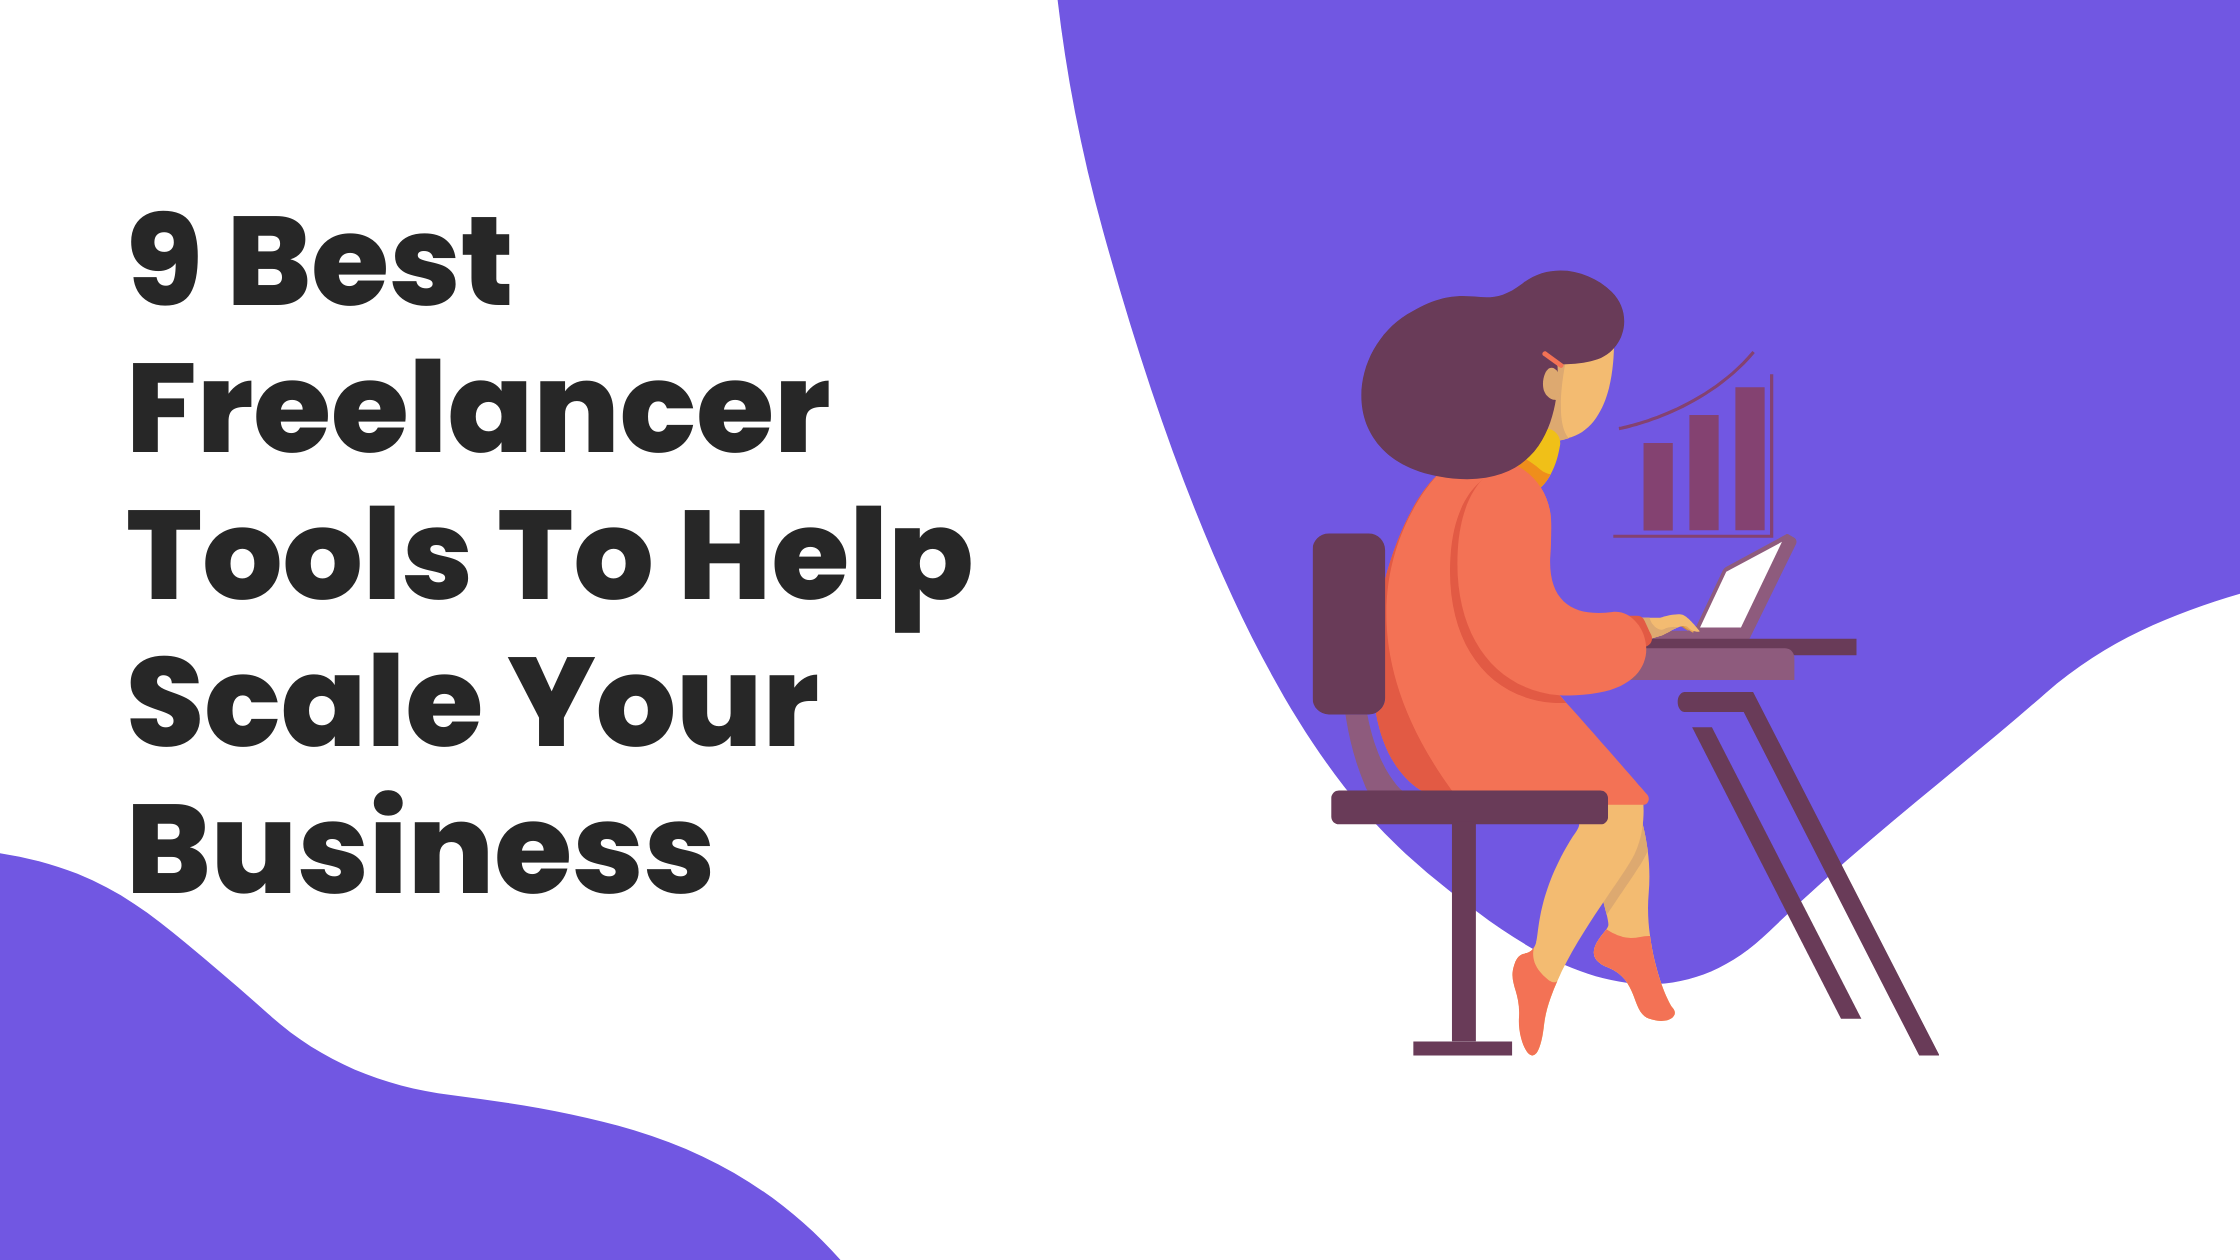 9 Best Freelancer Tools To Help Scale Your Business